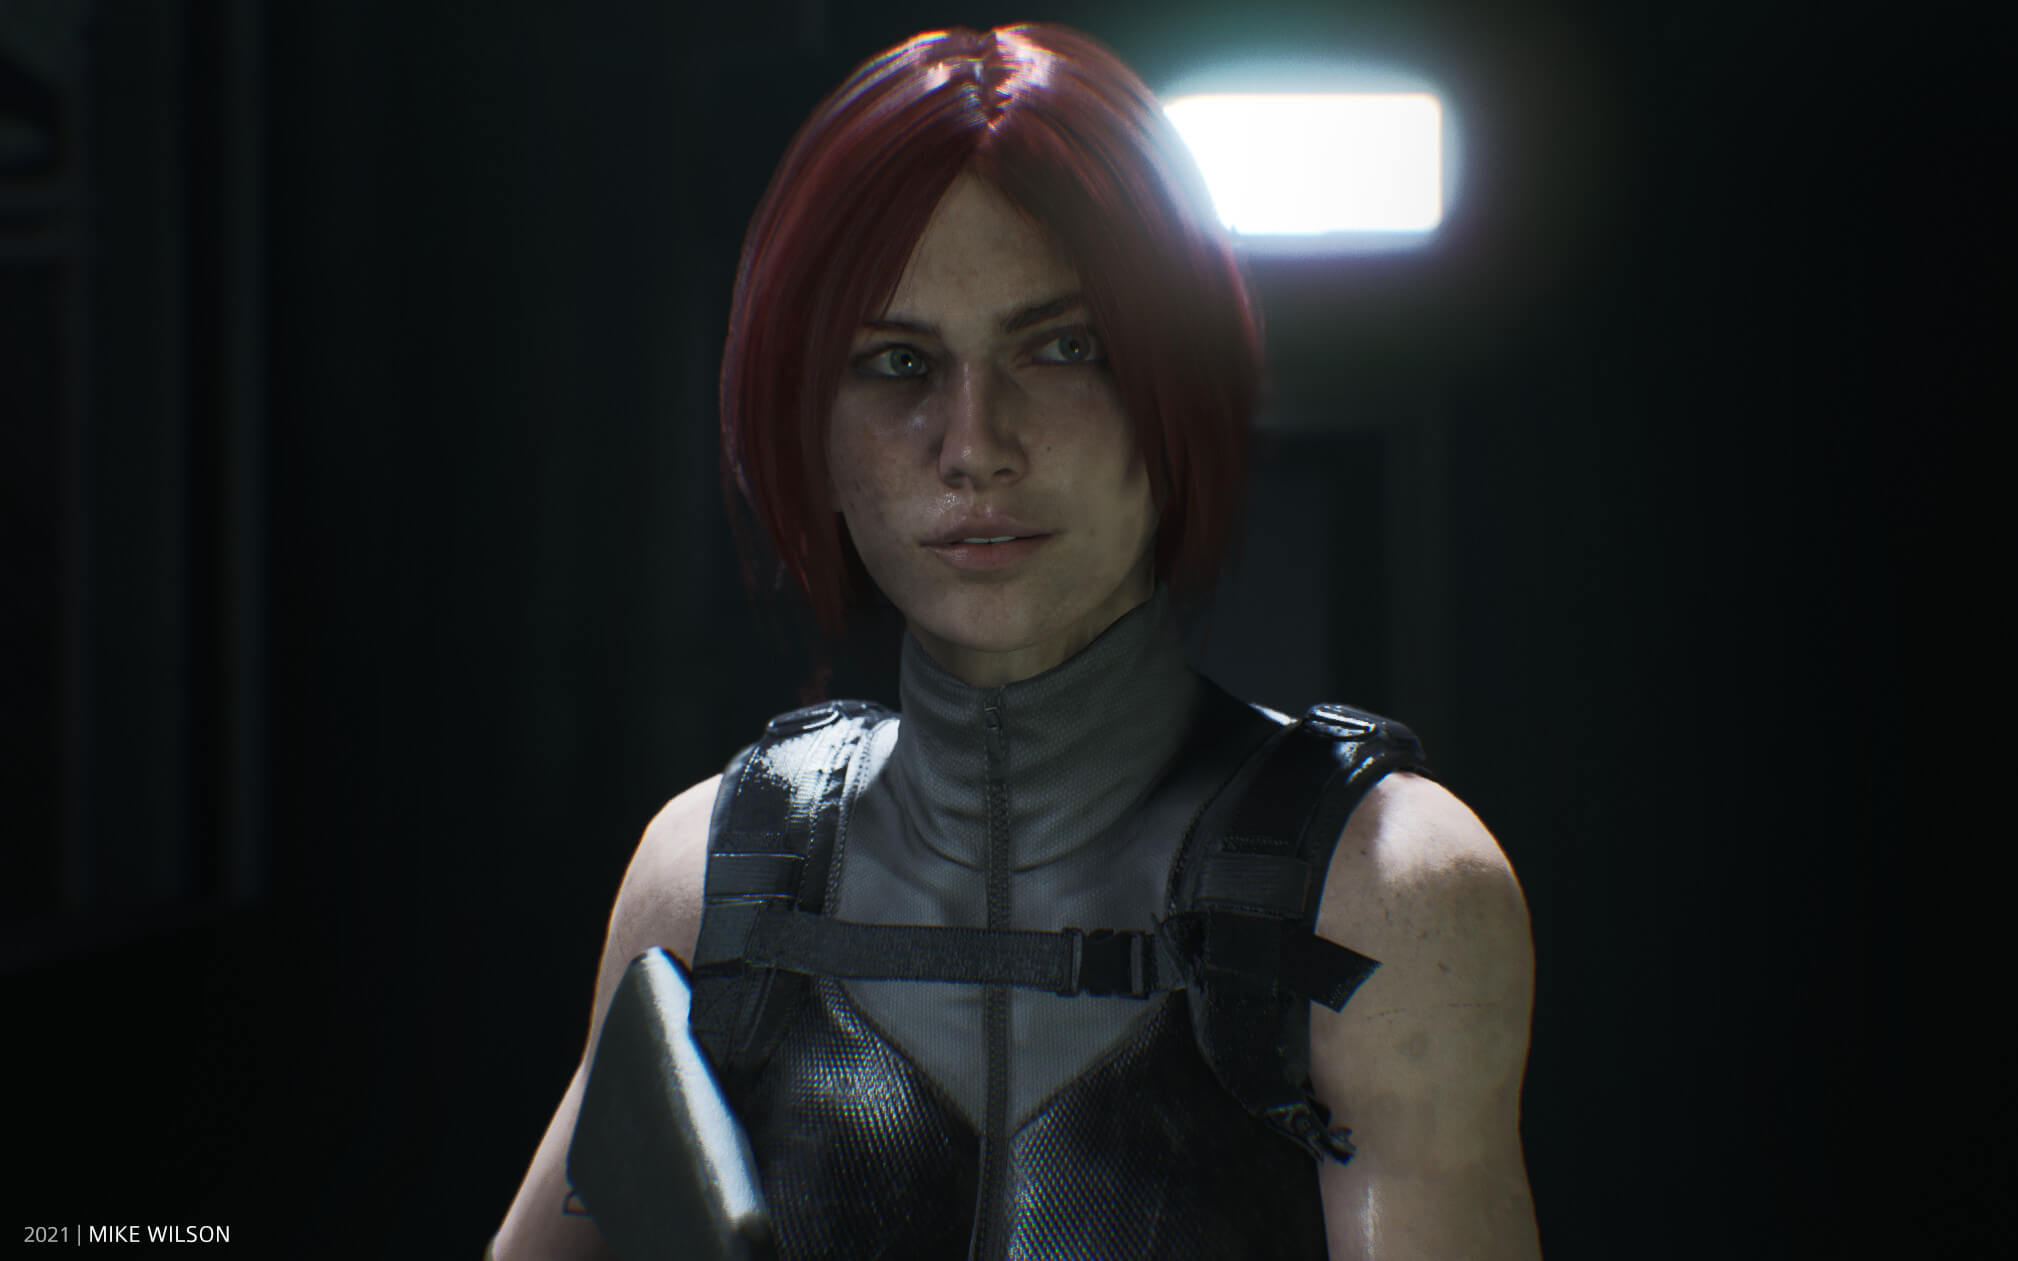 Dino Crisis Unreal Engine 5 Concept Trailer Makes Us Wish for a New Entry  in the Series Even More